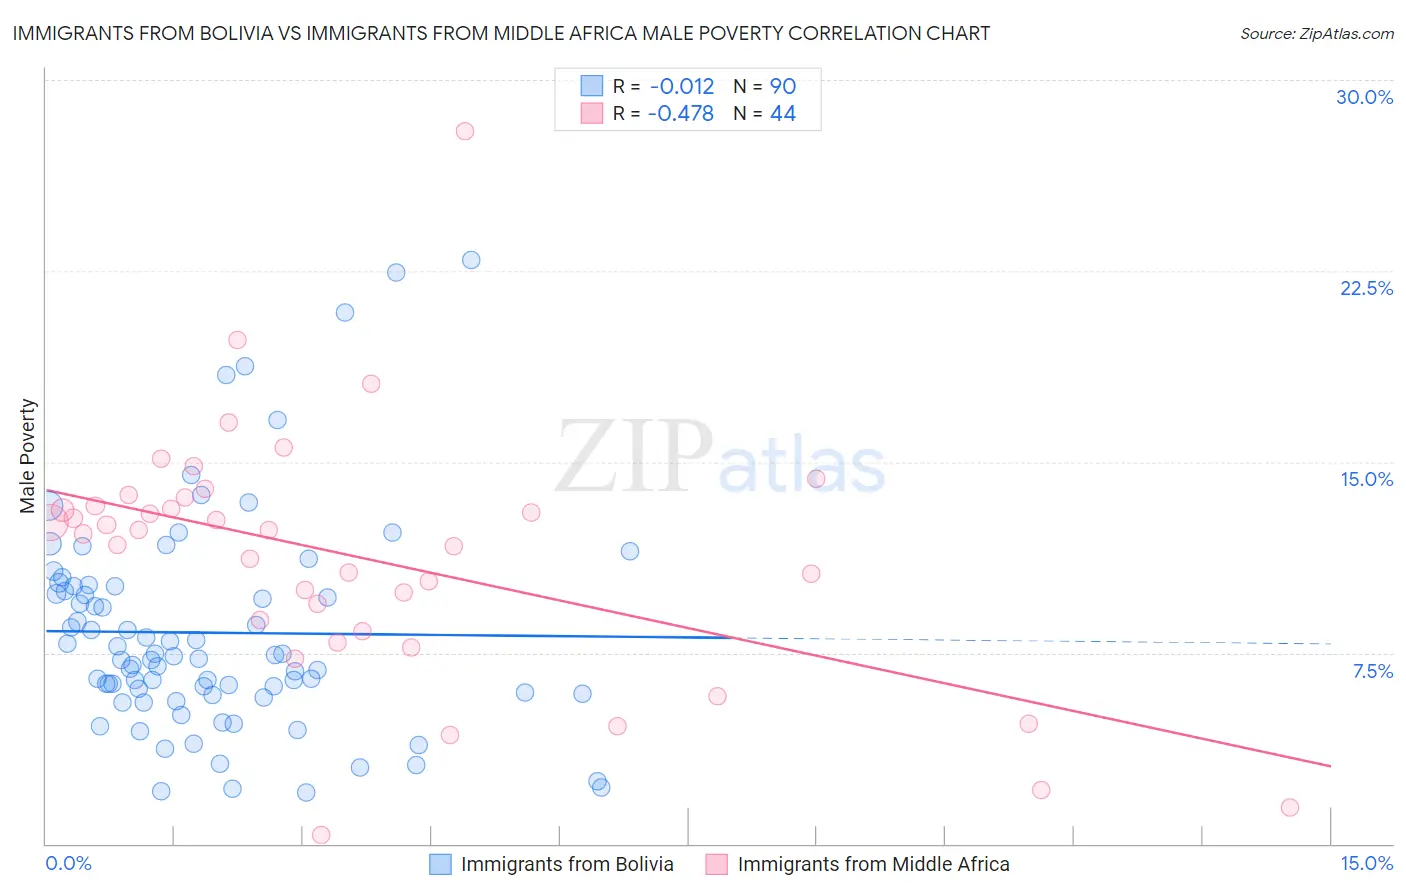 Immigrants from Bolivia vs Immigrants from Middle Africa Male Poverty